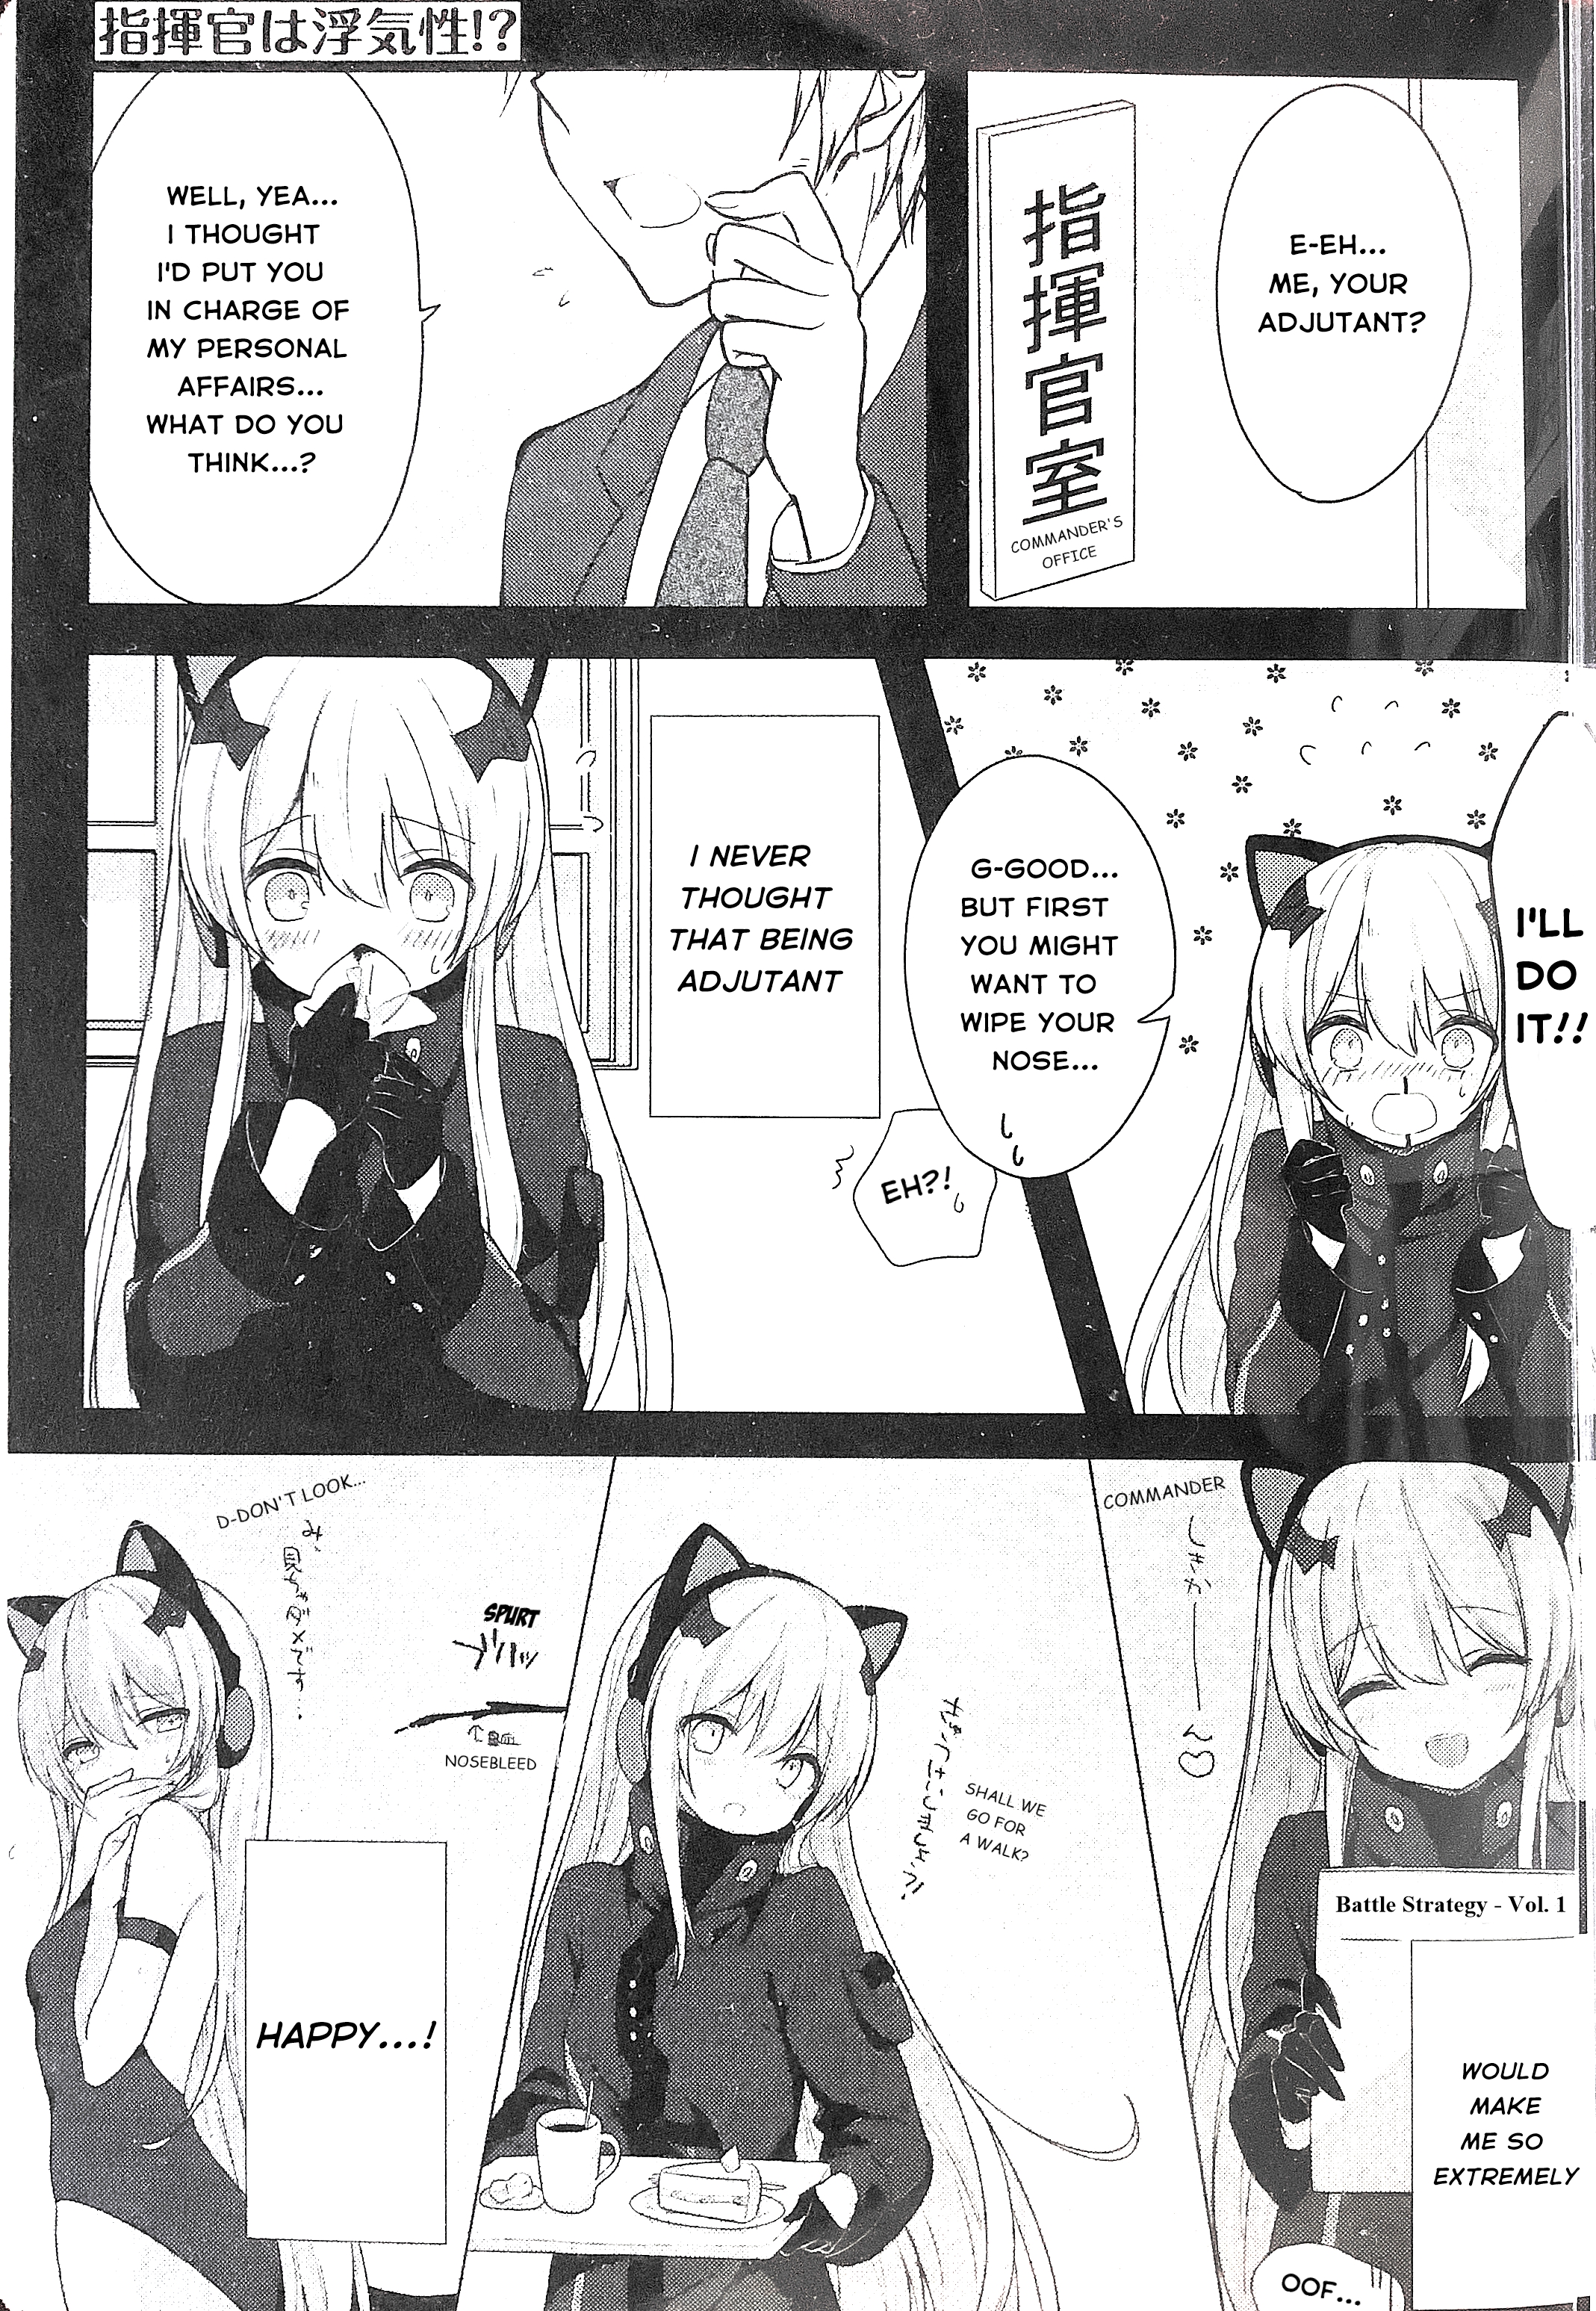 Dolls Frontline Comic Anthology - DNA Media 2019 - Chapter 14778 - The Commander is a Cheater! - Image 1